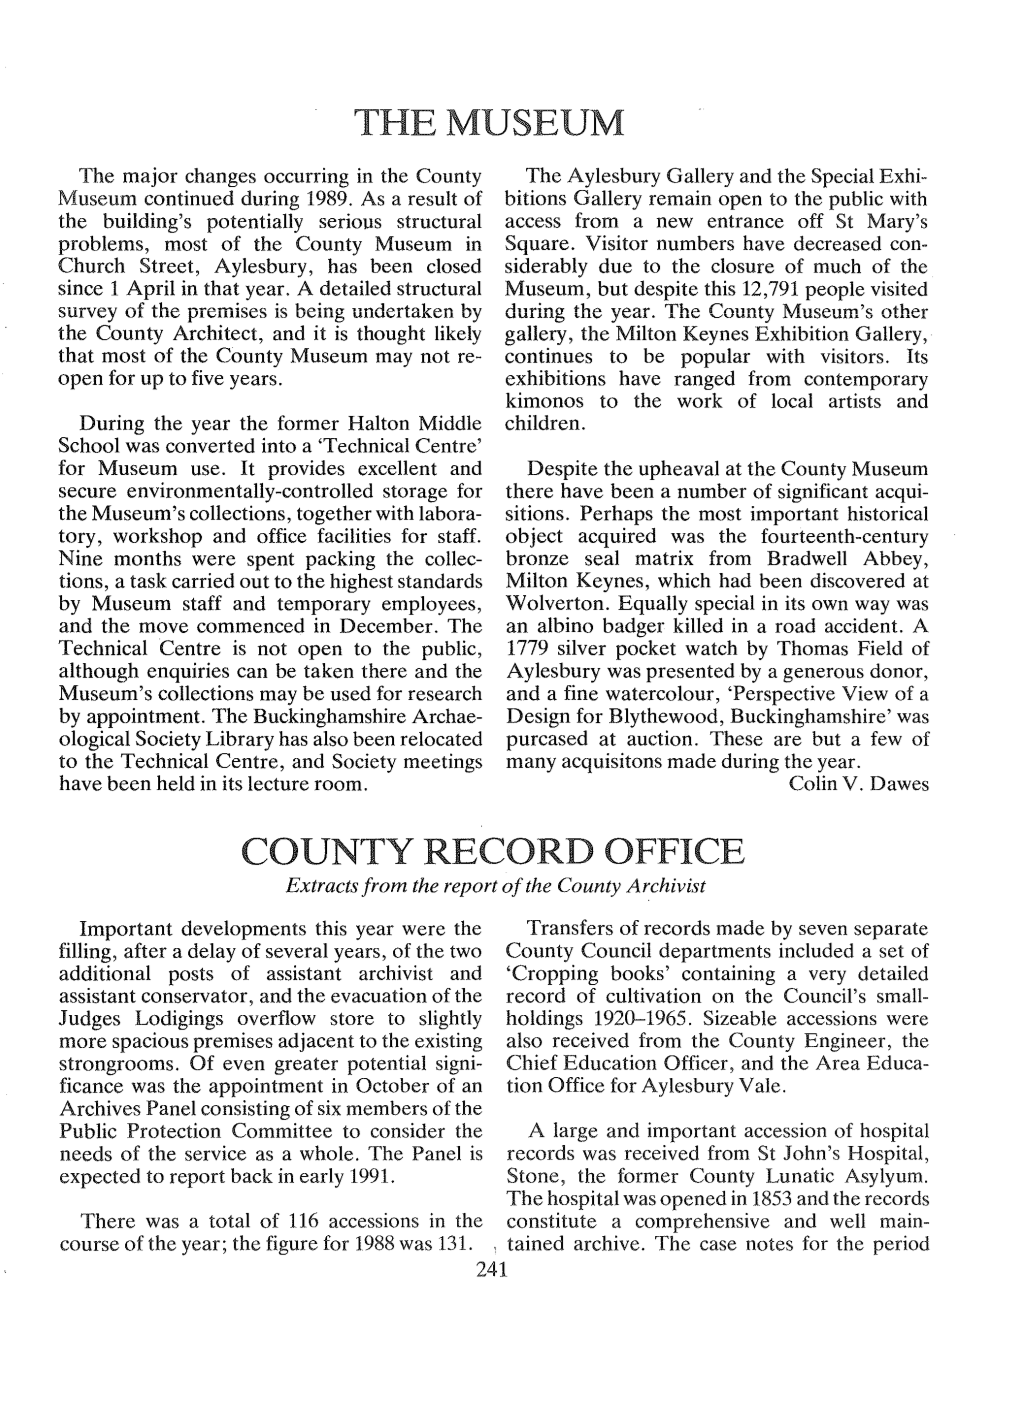 The Museum County Record Office